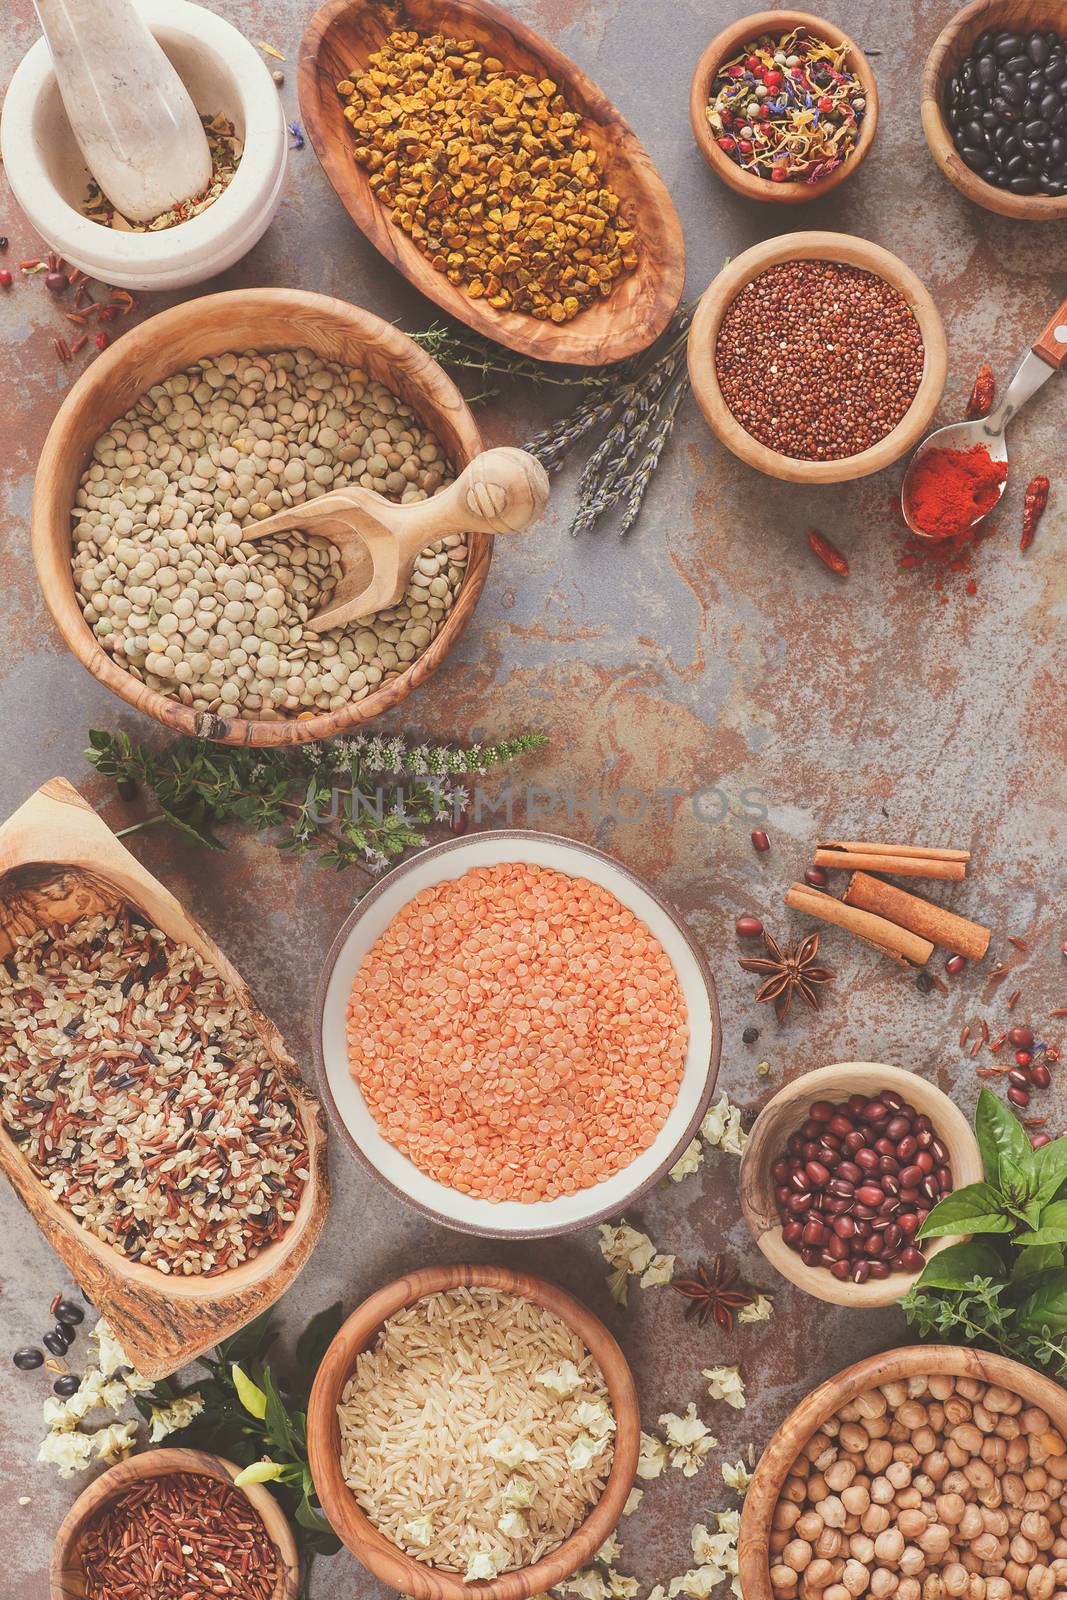 Assortment of legumes, grain and seeds by Slast20